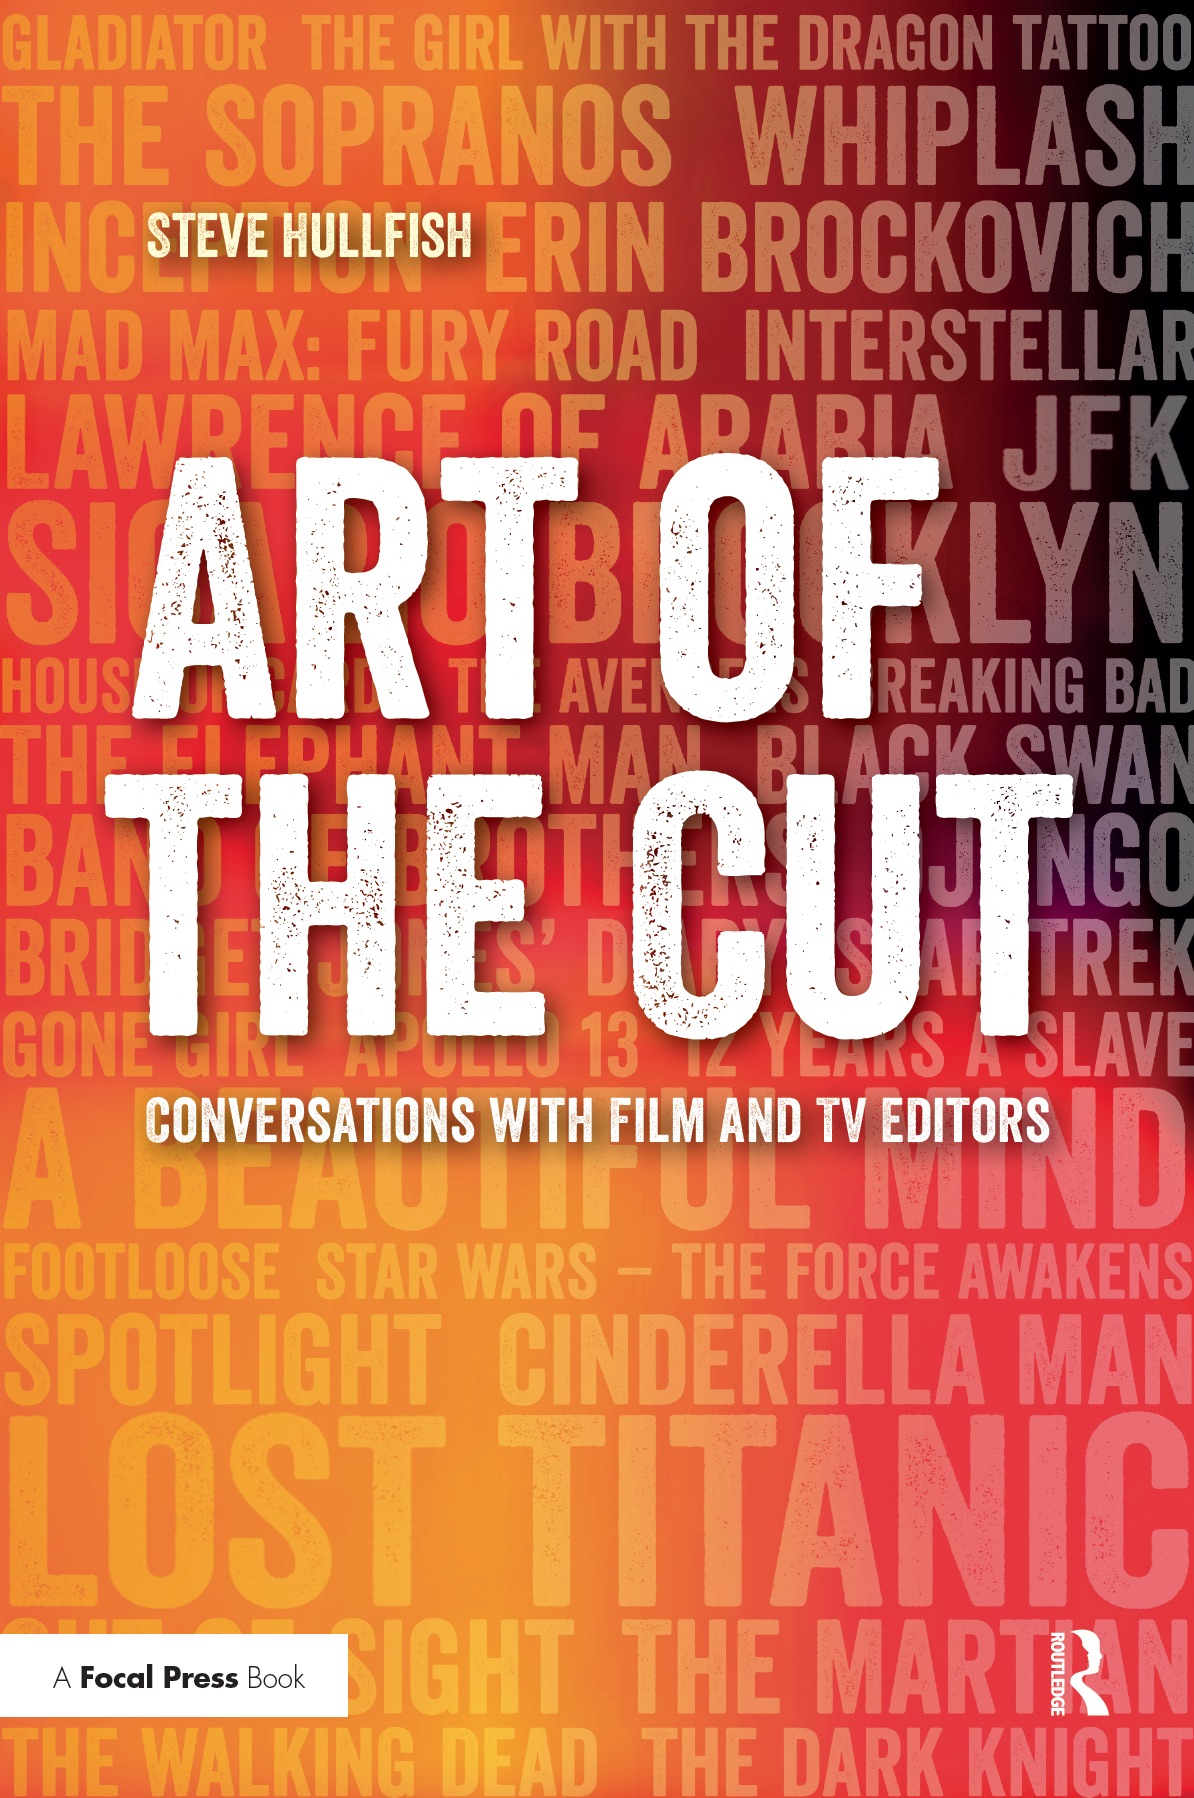 ART OF THE CUT with ACE EDDIE winner "The Favourite" 24